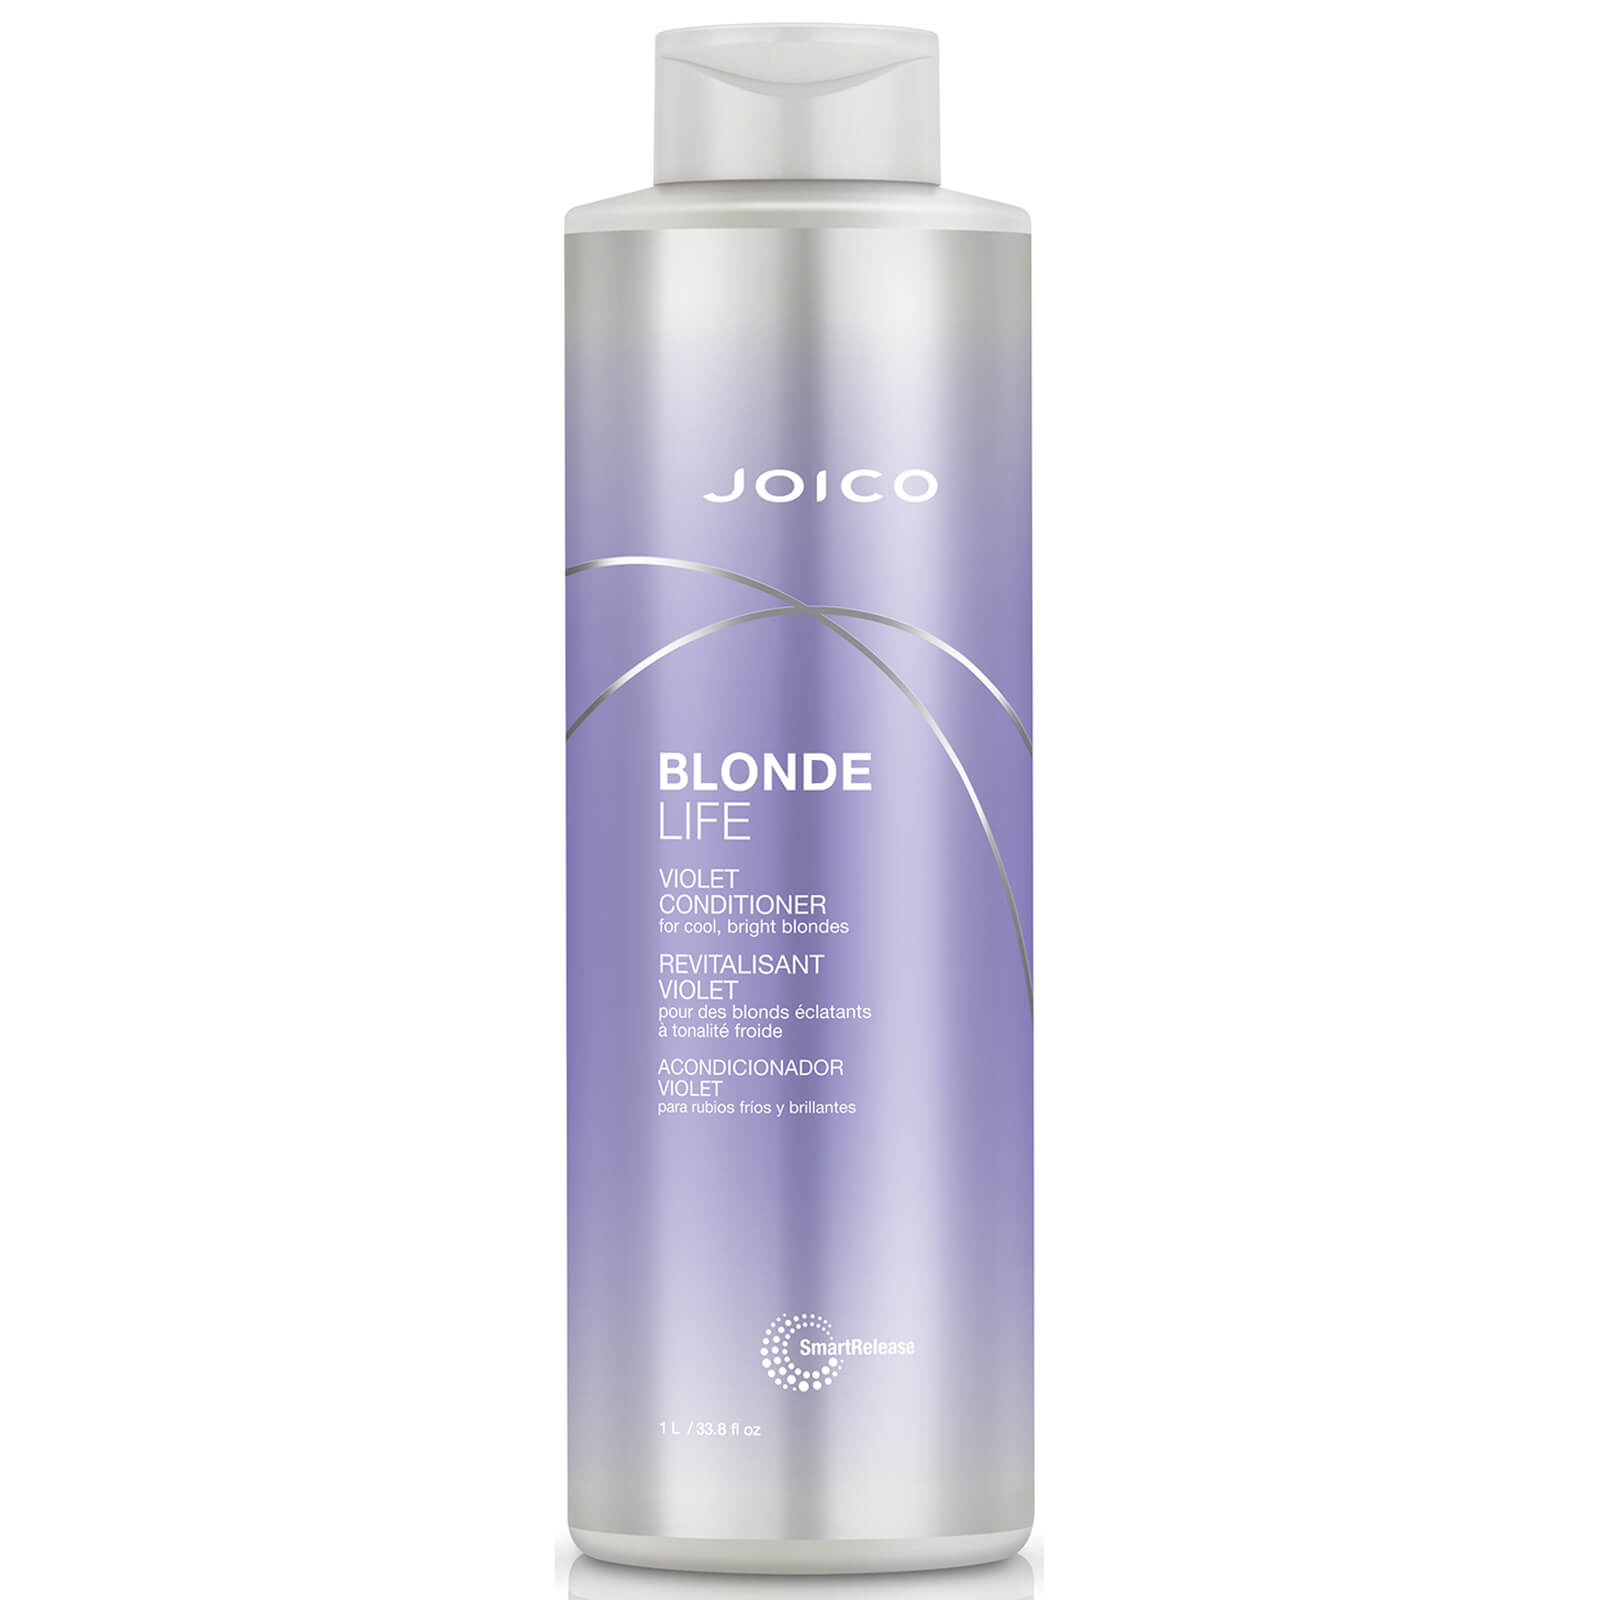 Joico Blonde Life Violet Conditioner 1000ml (Worth PS93.20)